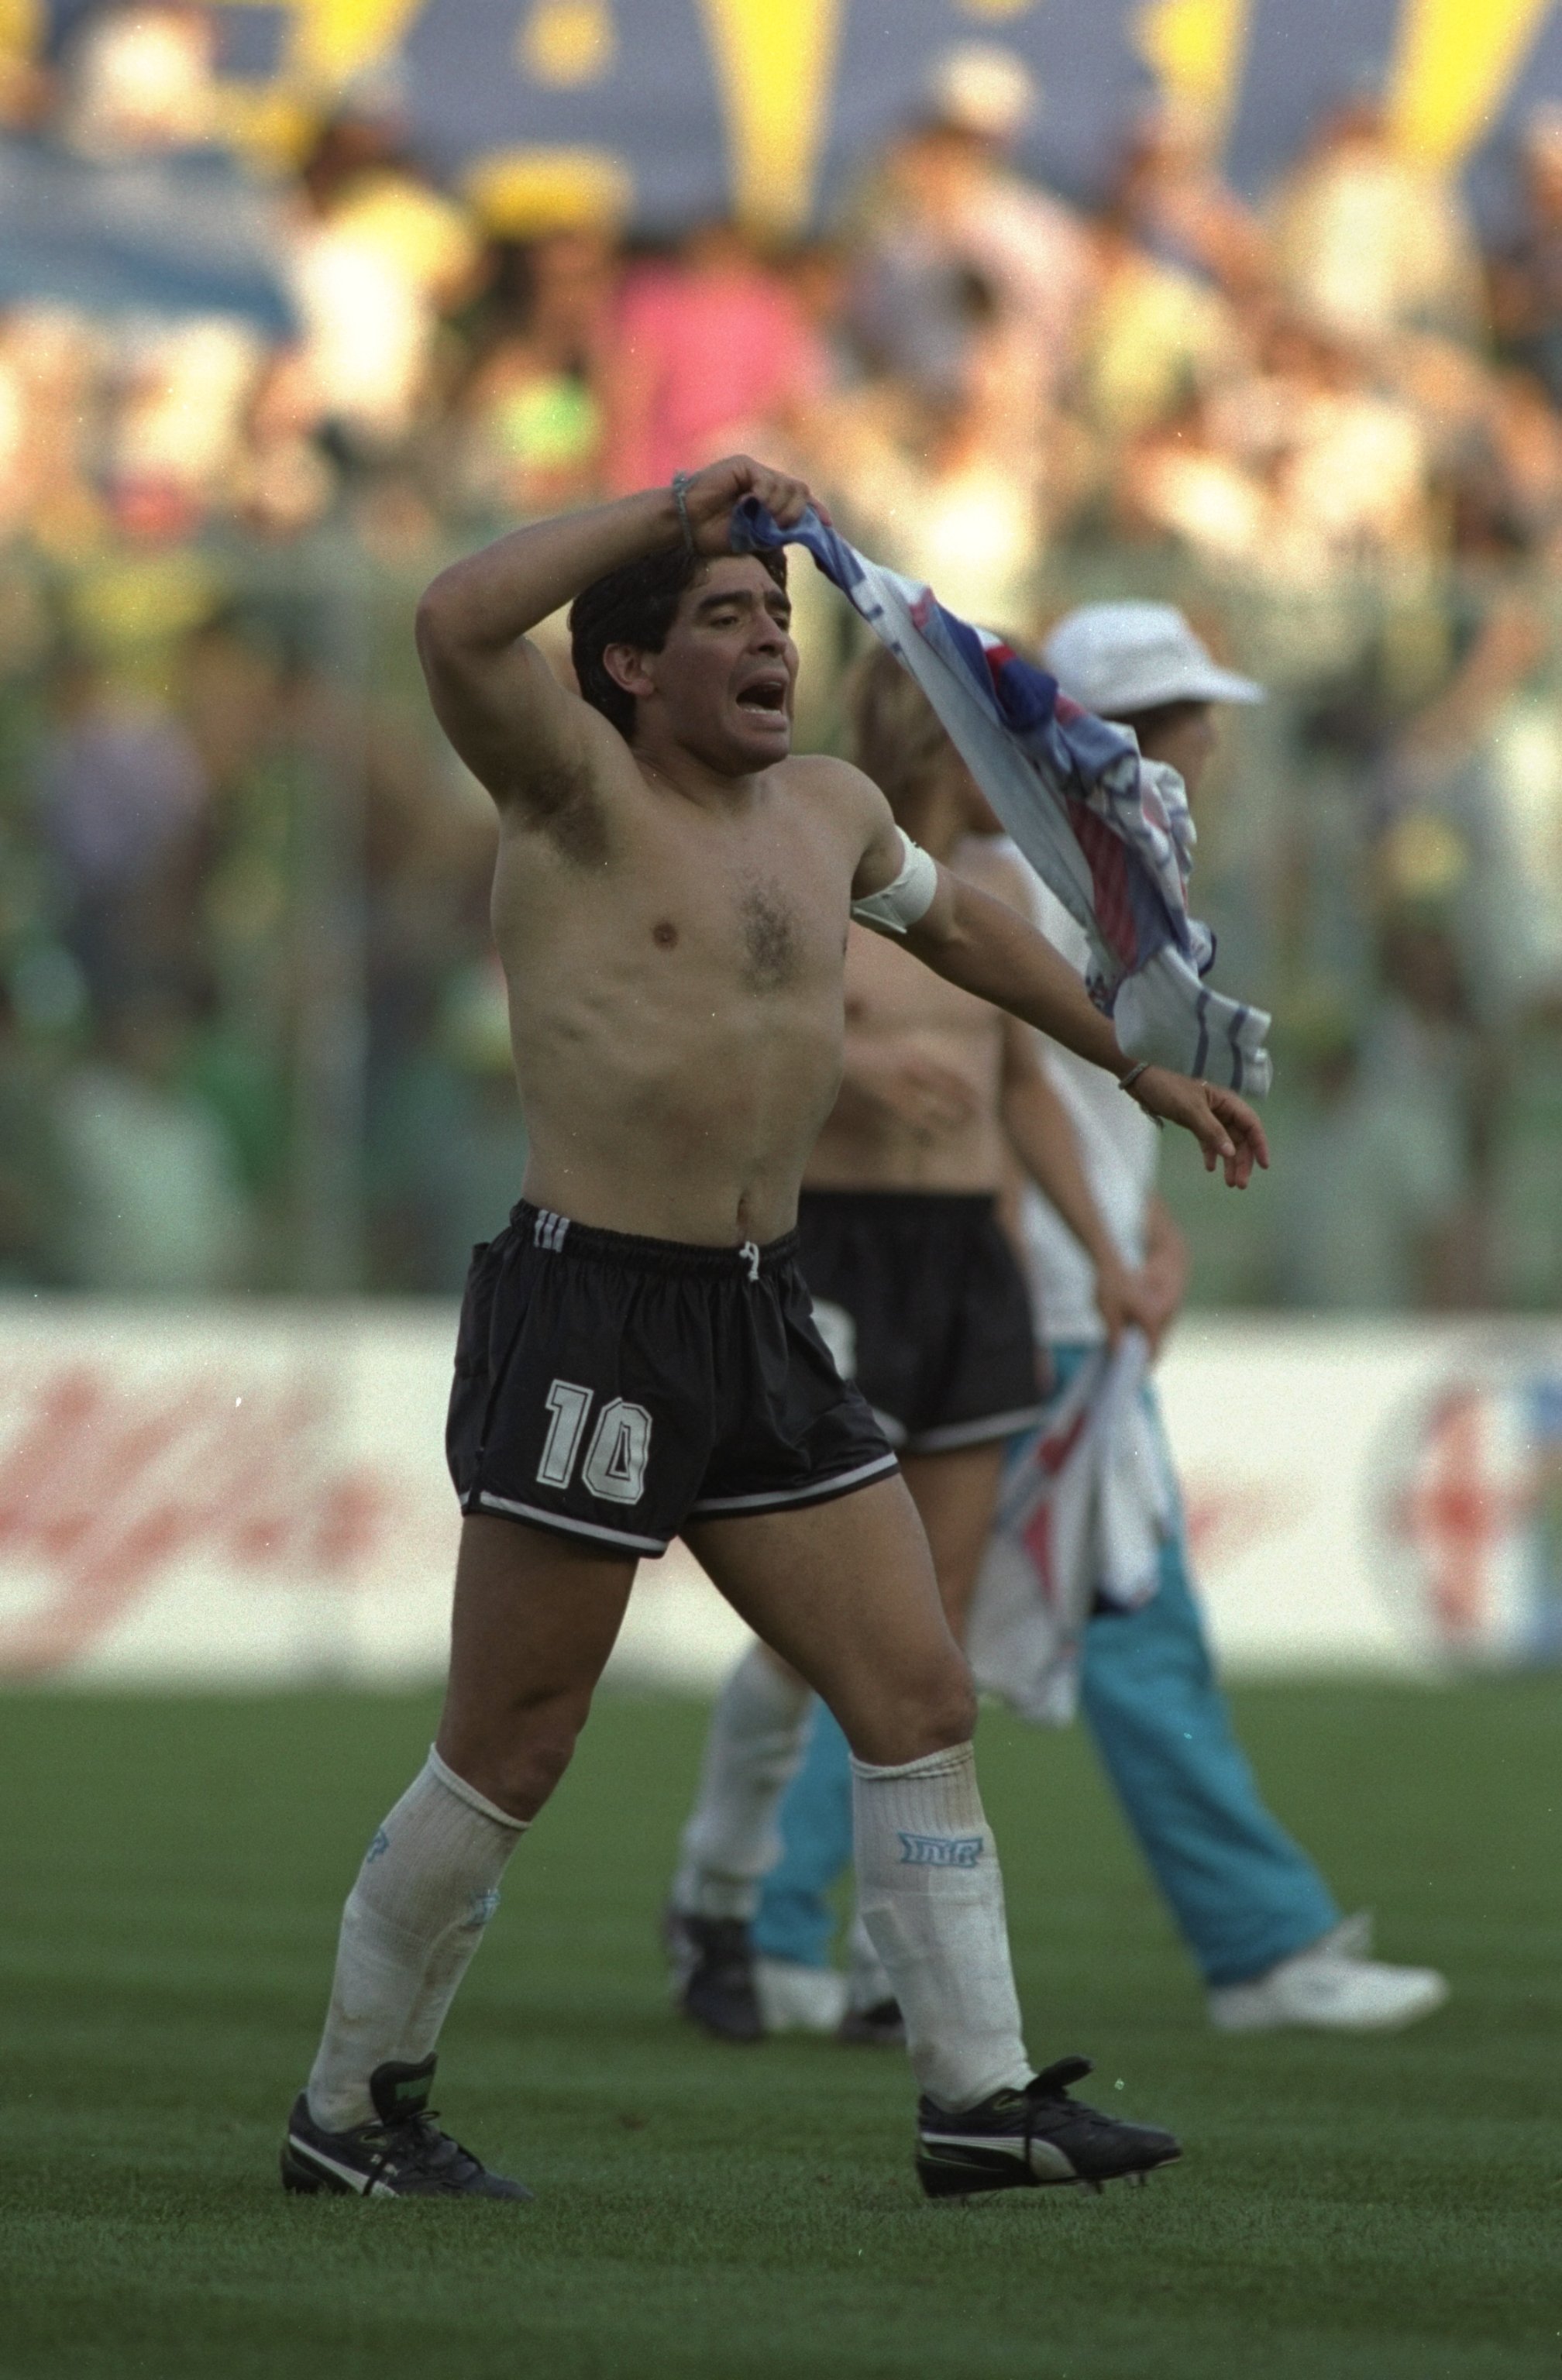 Diego Maradona: The 40 Greatest Footballers Of All Time Ranked By Fans